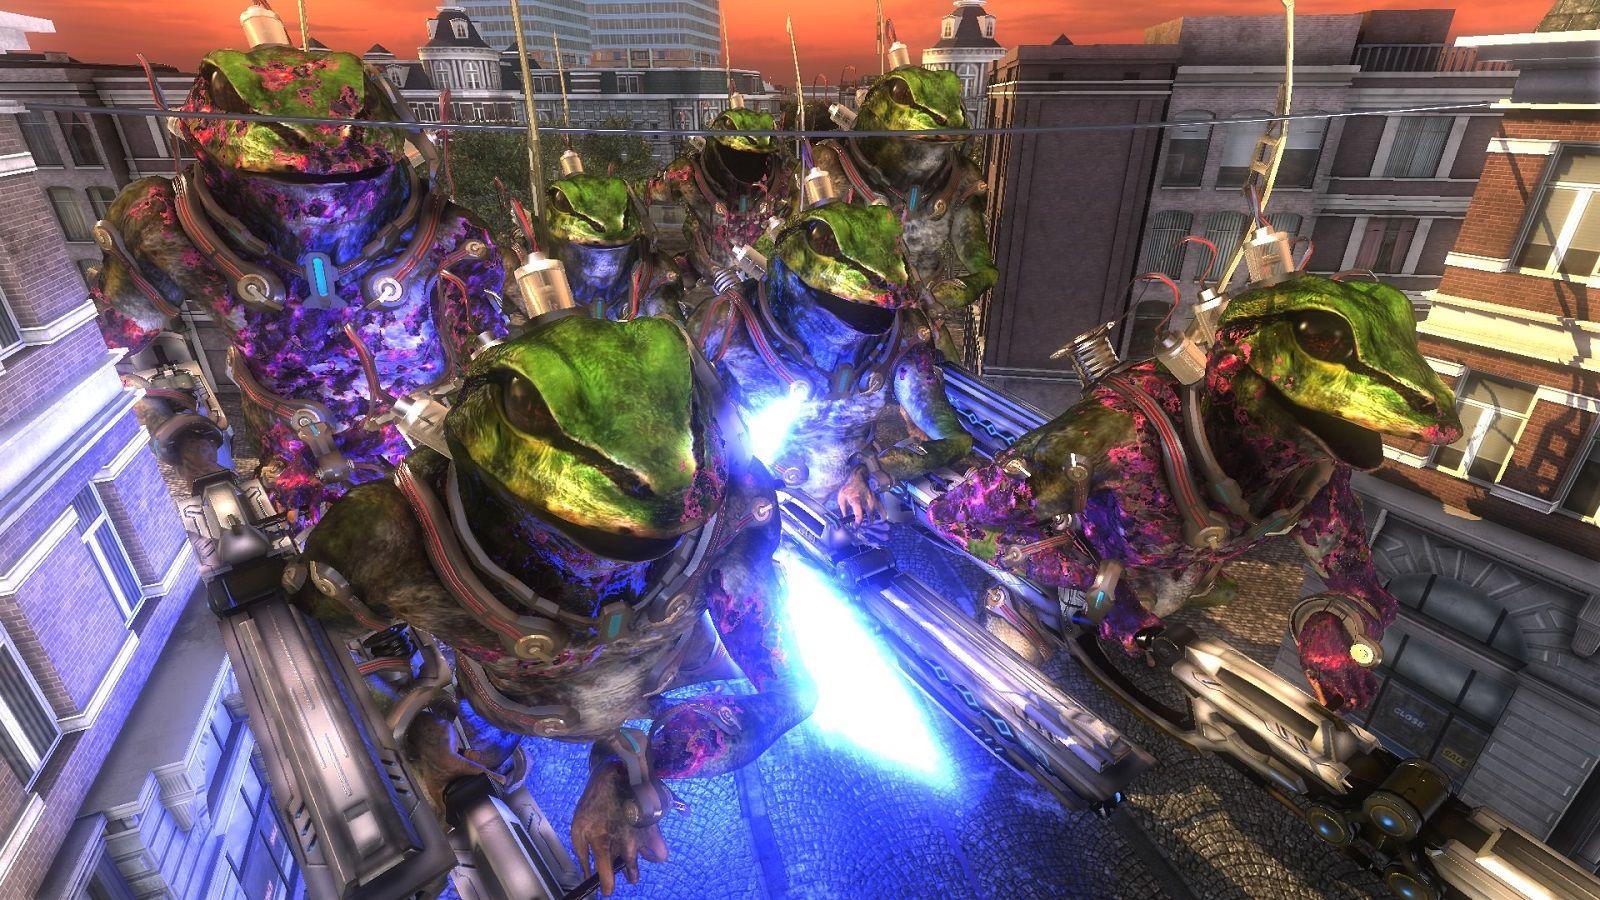 Battle the alien invasion with Earth Defense Force 5 this December